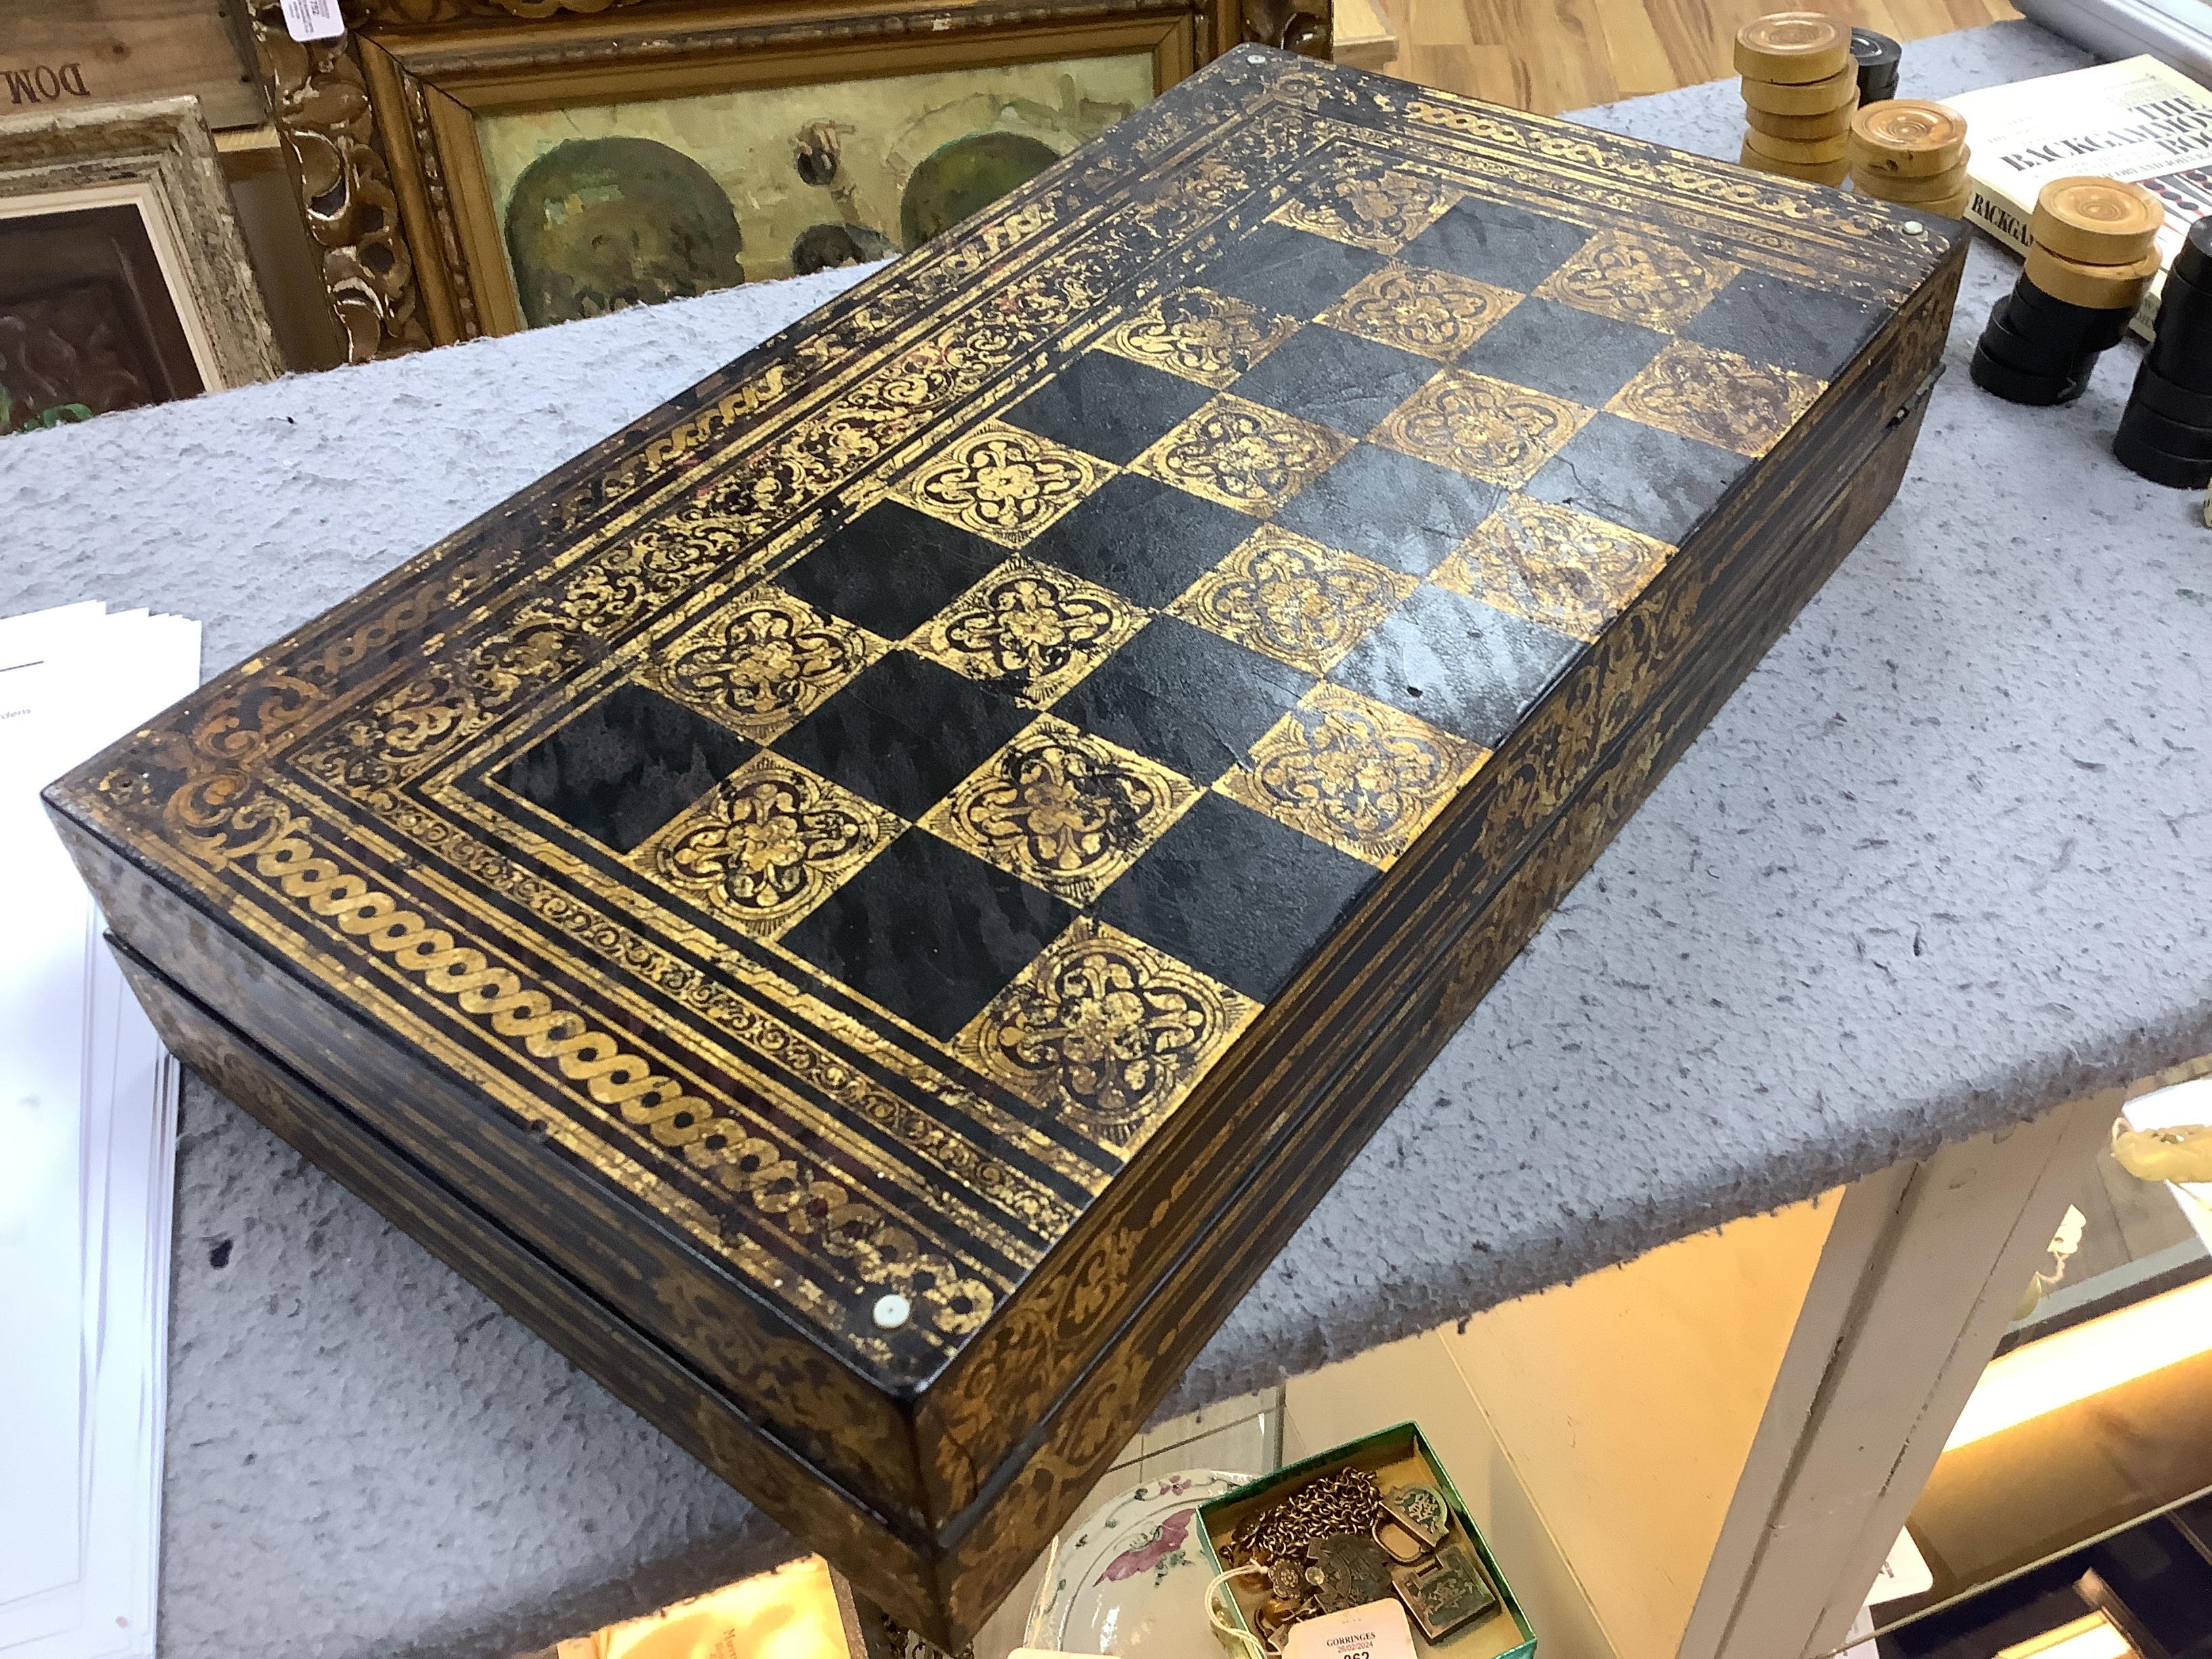 A 19th century papier maché folding games board for chess and backgammon, containing a wooden draughts set etc. with gilt decoration, 41 x 45cm unfolded